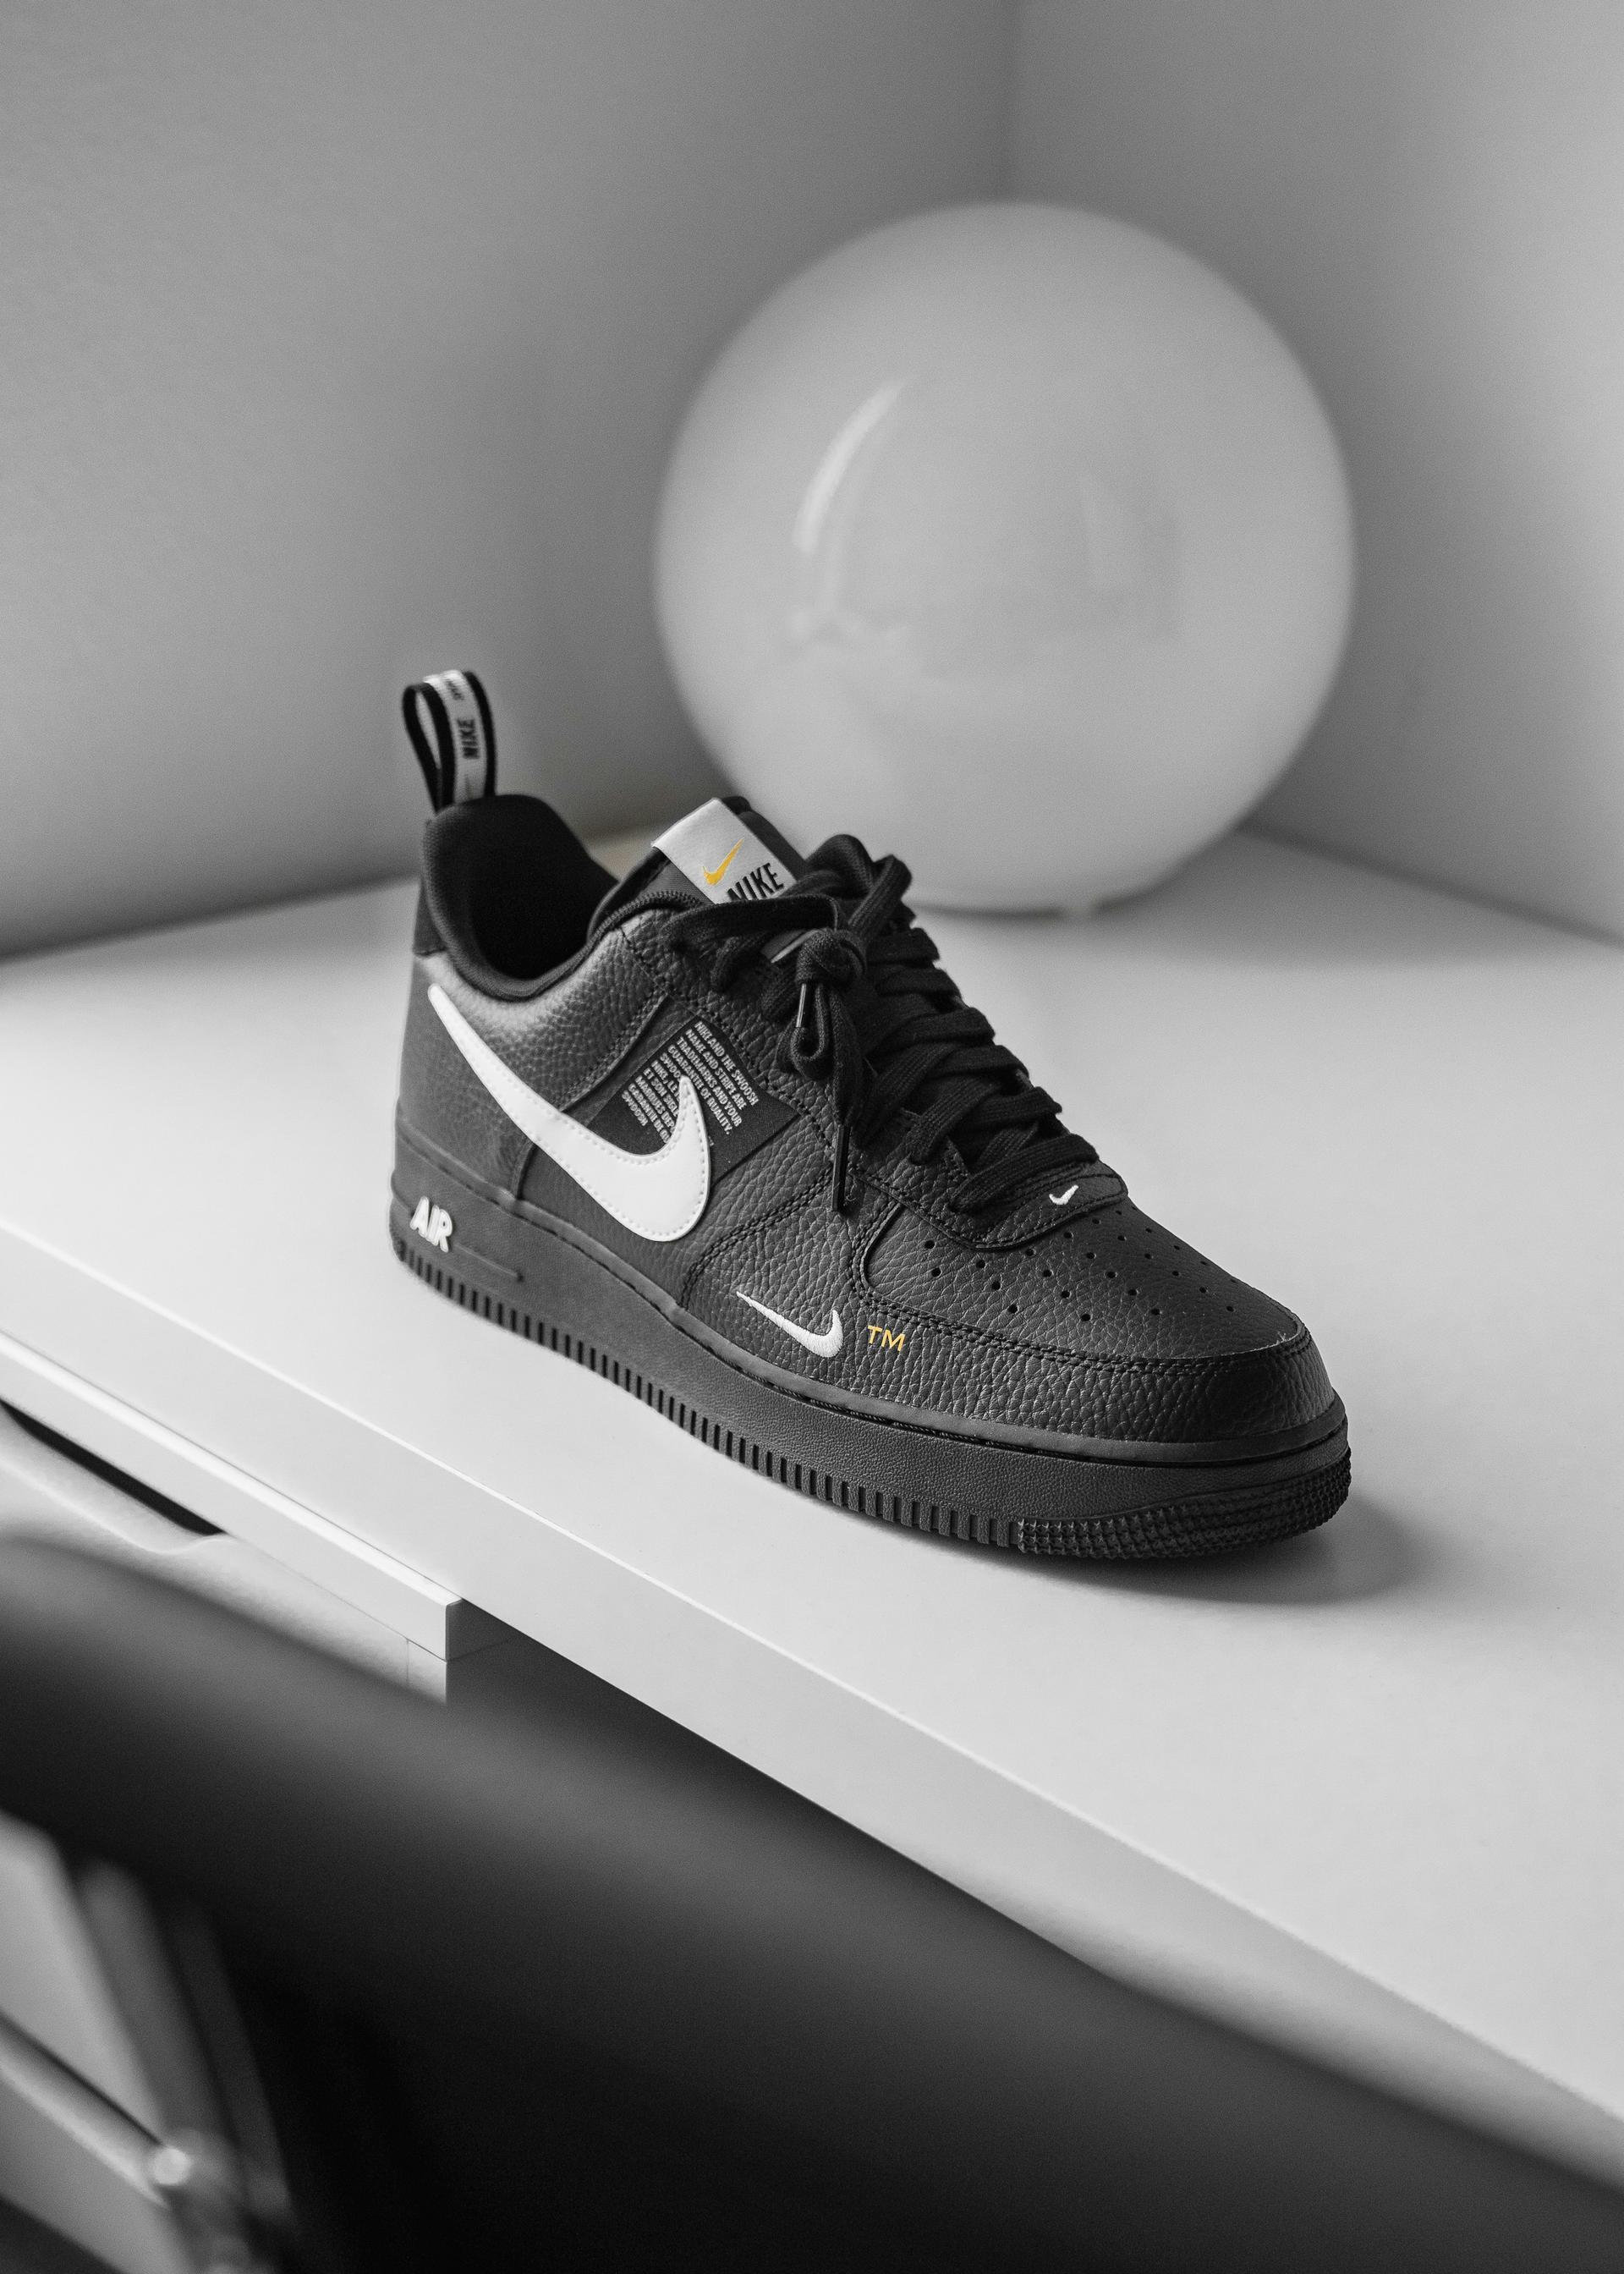 Nike Pitch Black Air Force 1 - Elevate Your Street Style in Stealth Mode